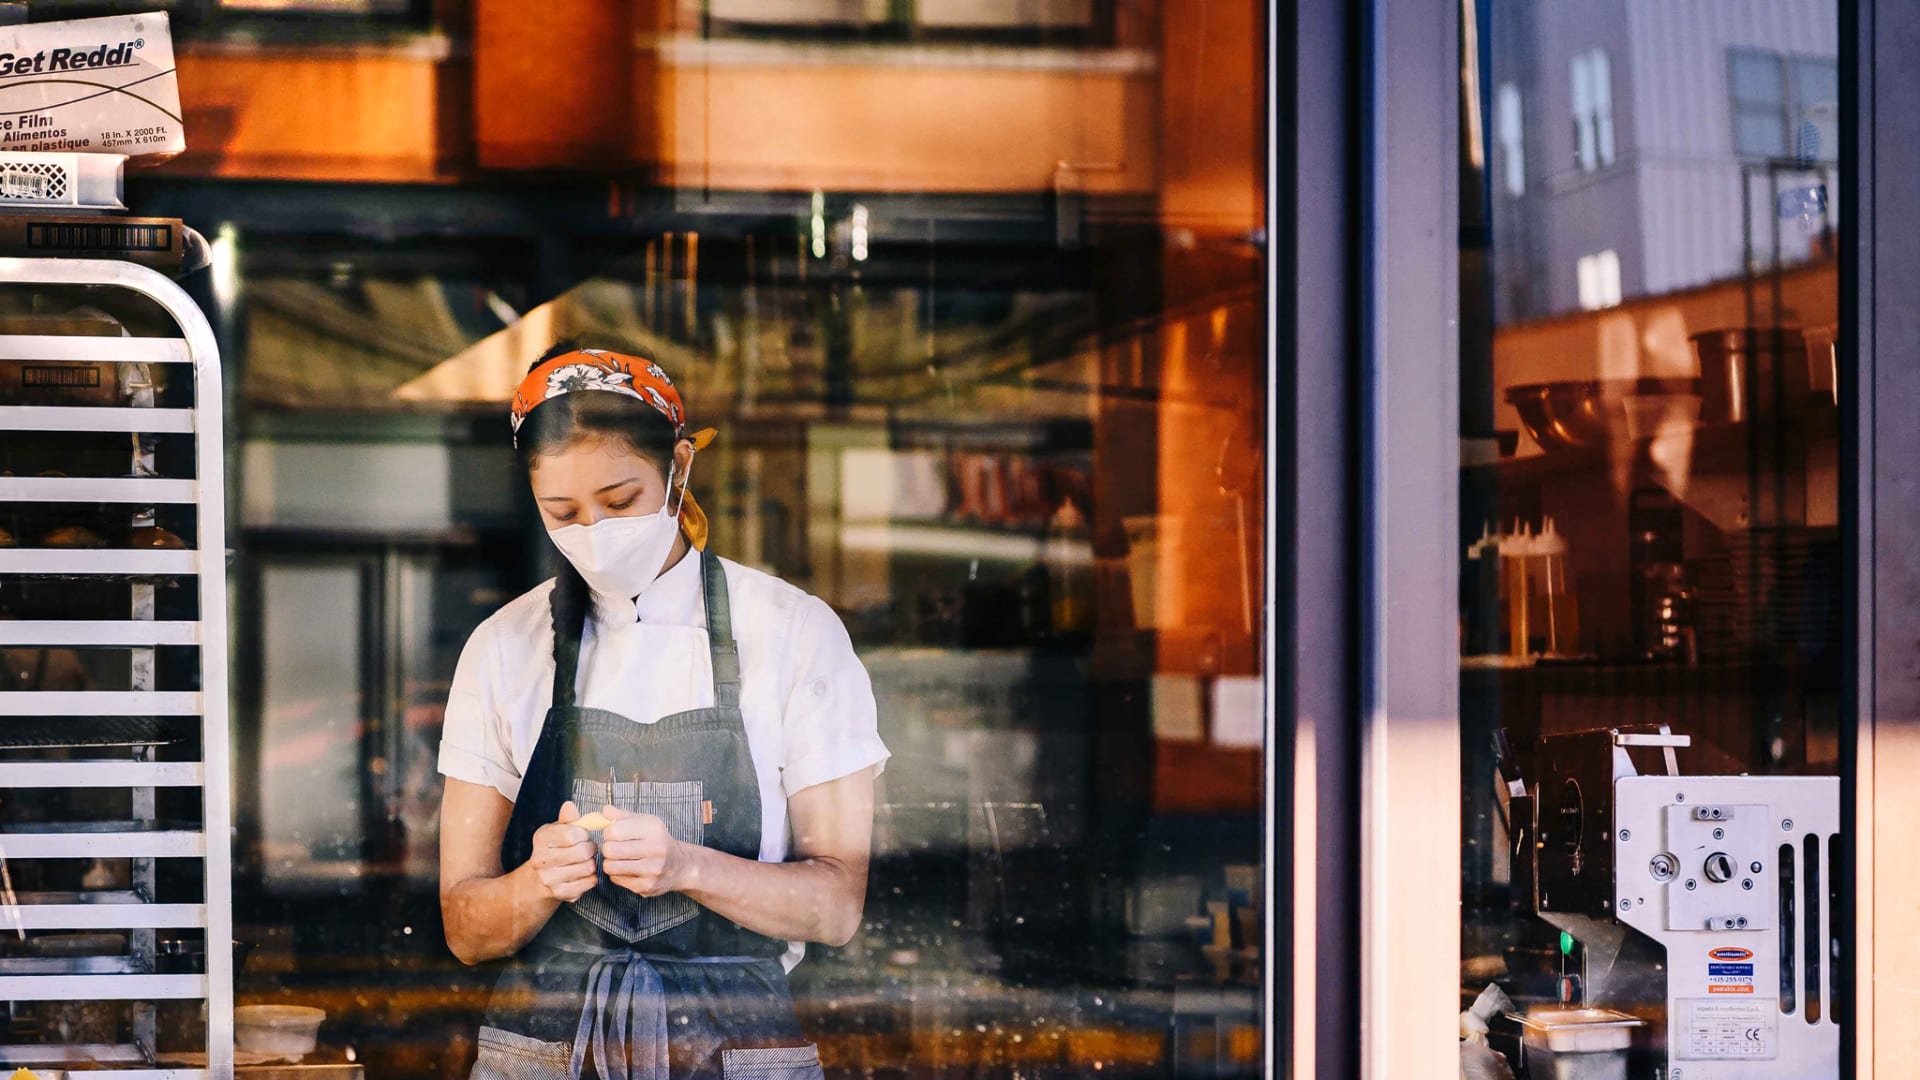 A worker wears a protective mask while preparing food at a restaurant in downtown Memphis.